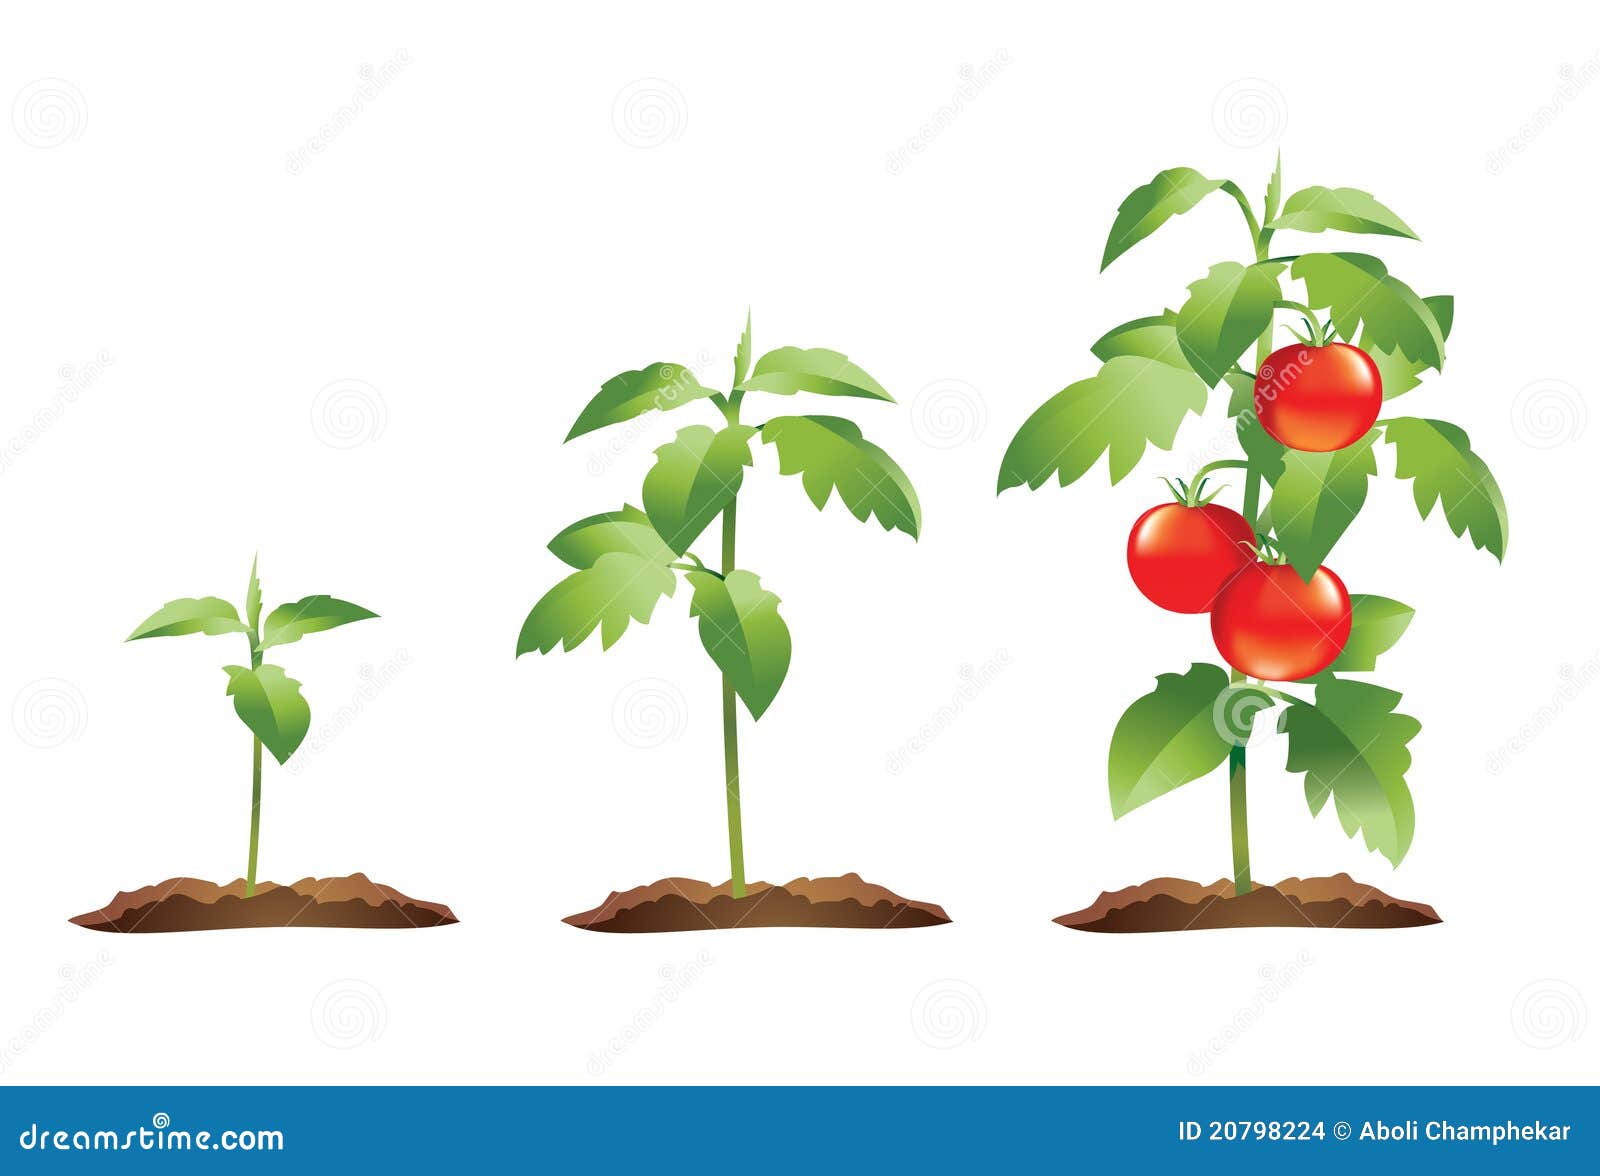 Tomato Plant Growth Cycle Stock Images - Image: 20798224